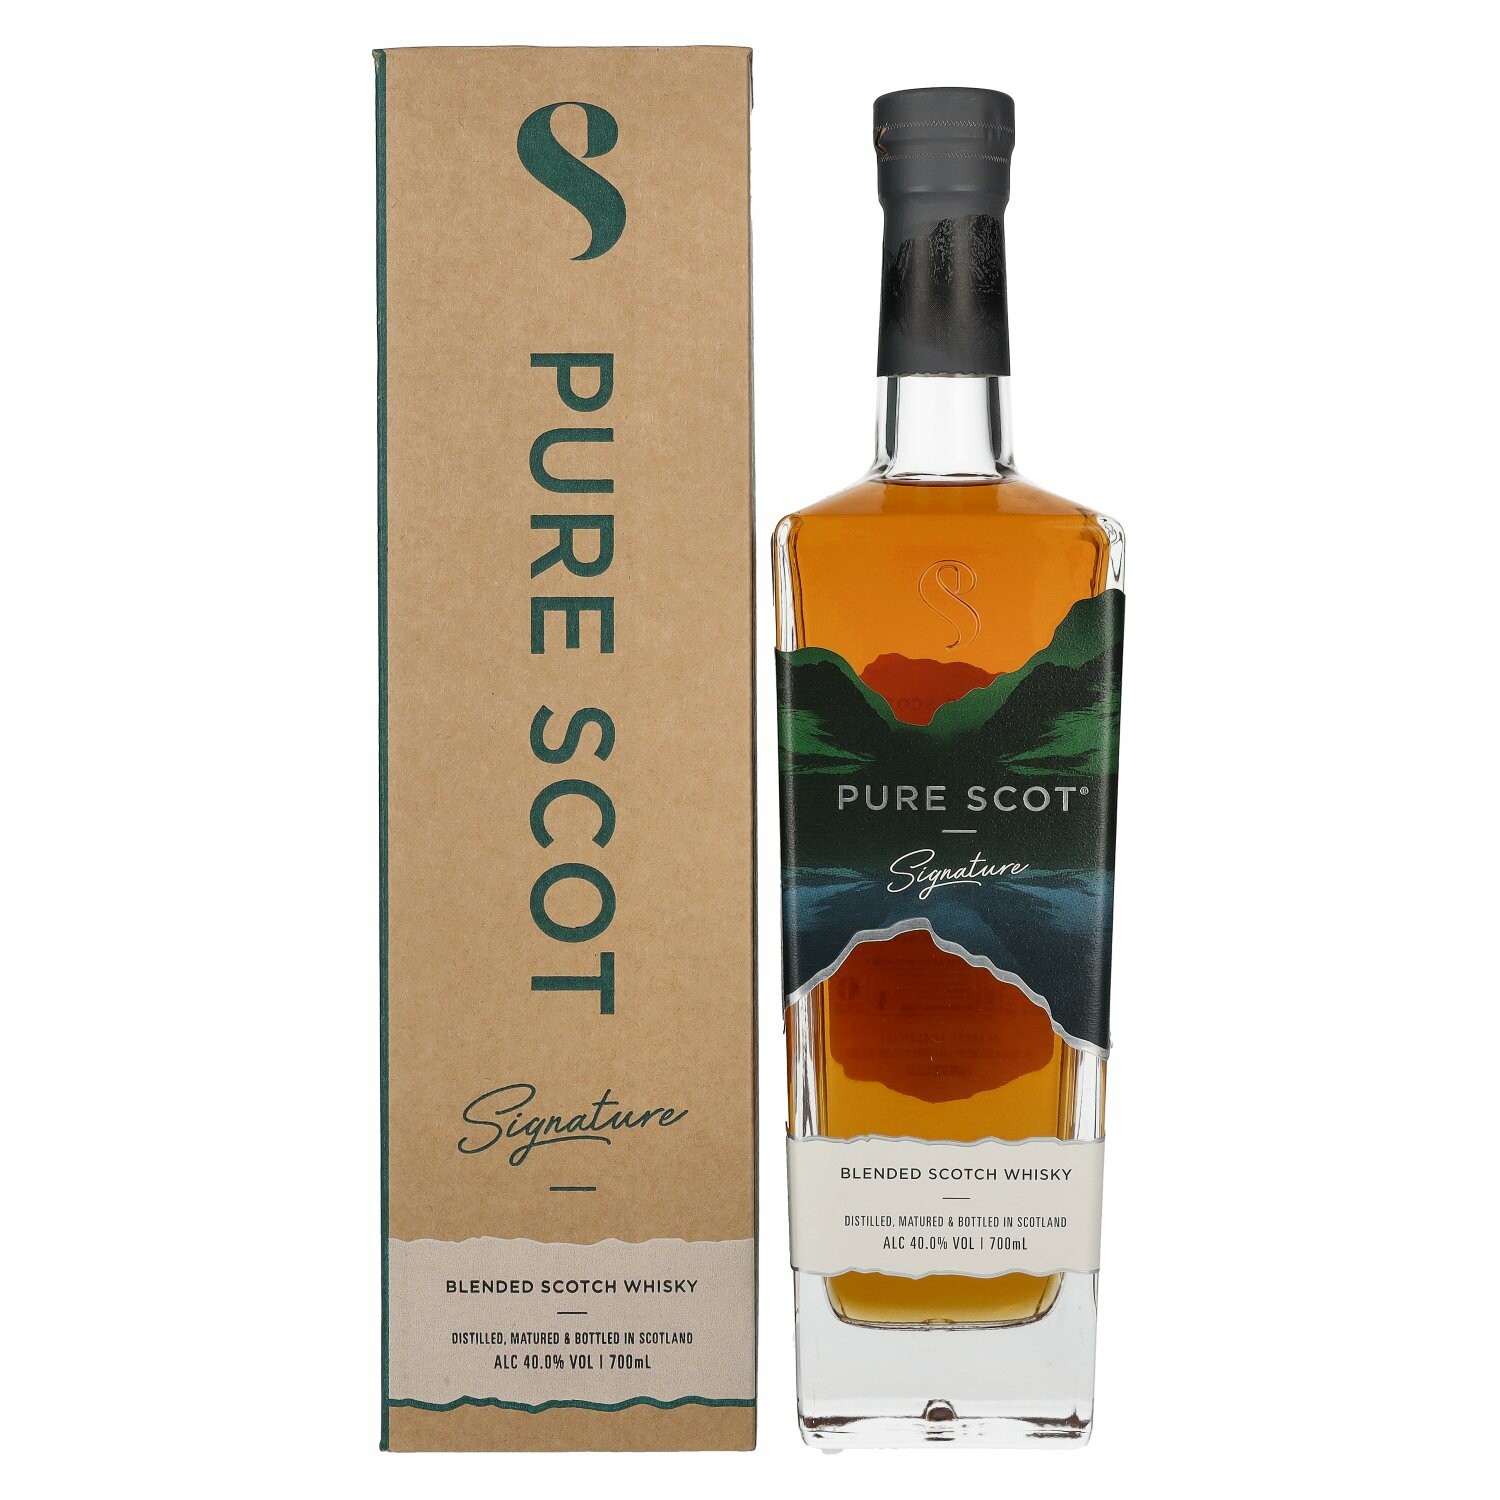 Bladnoch Pure Scot Blended Scotch Whisky 40% Vol. 0,7l in Giftbox